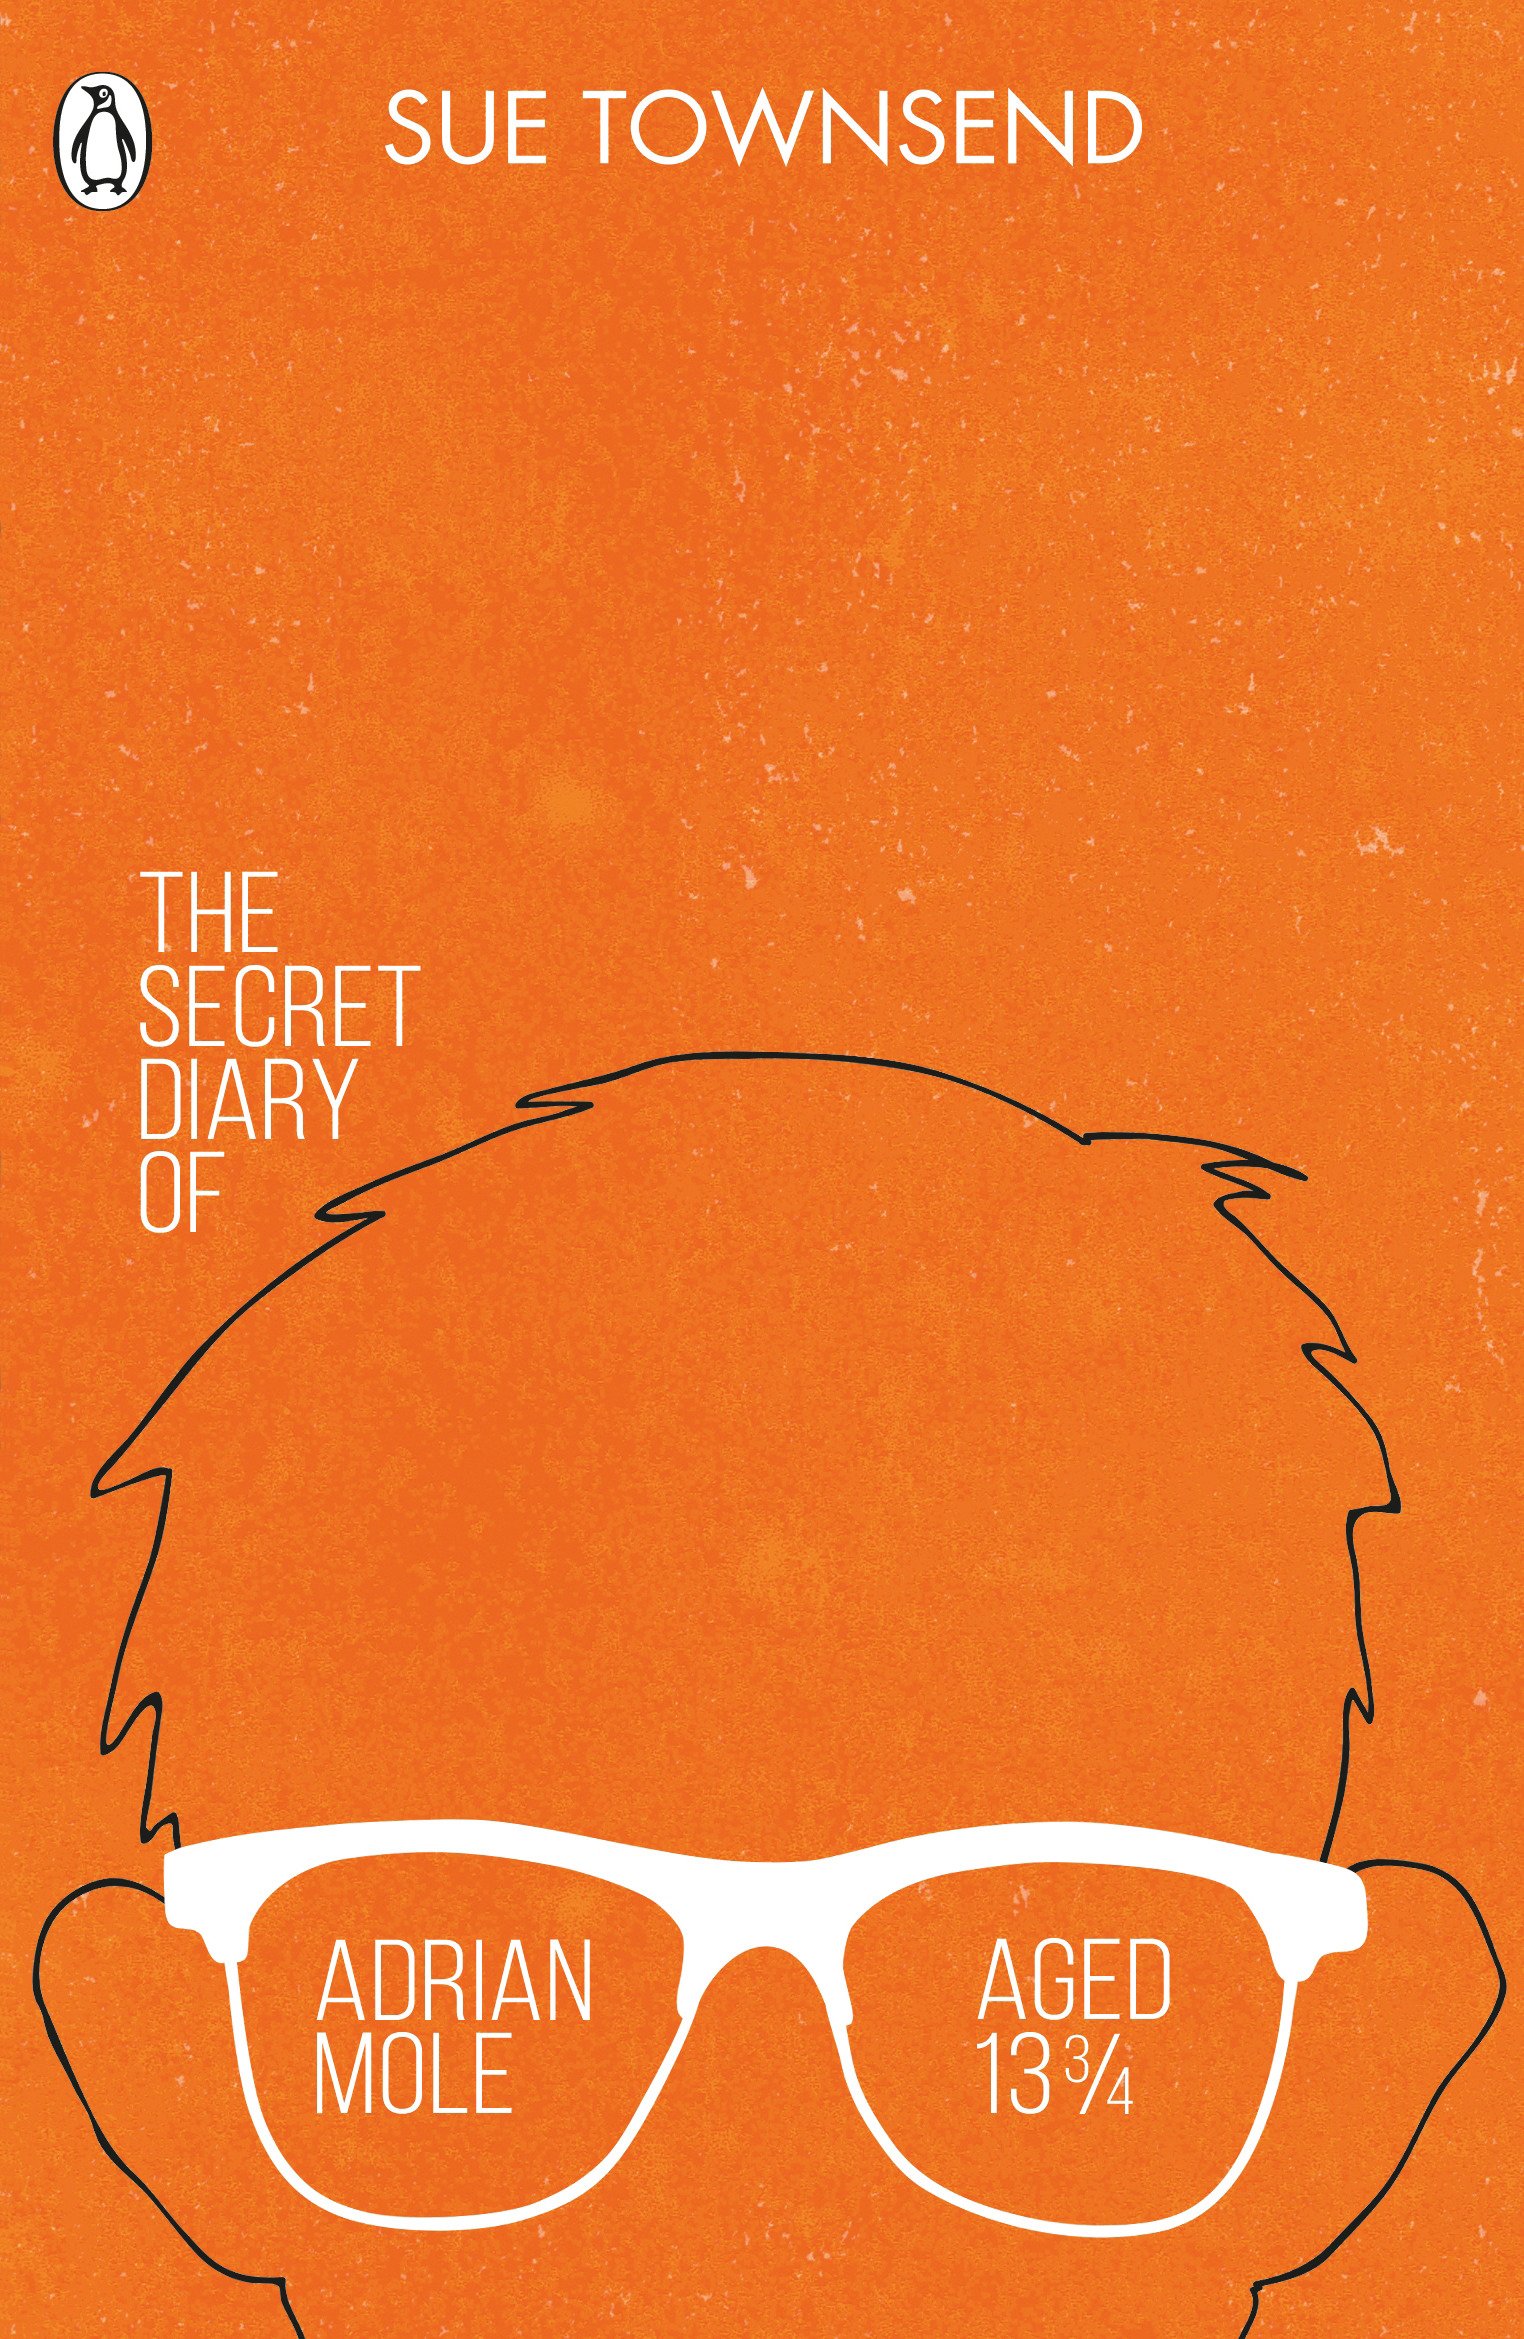 The Secret Diary of Adrian Mole Aged 13 3/4 | Sue Townsend image9